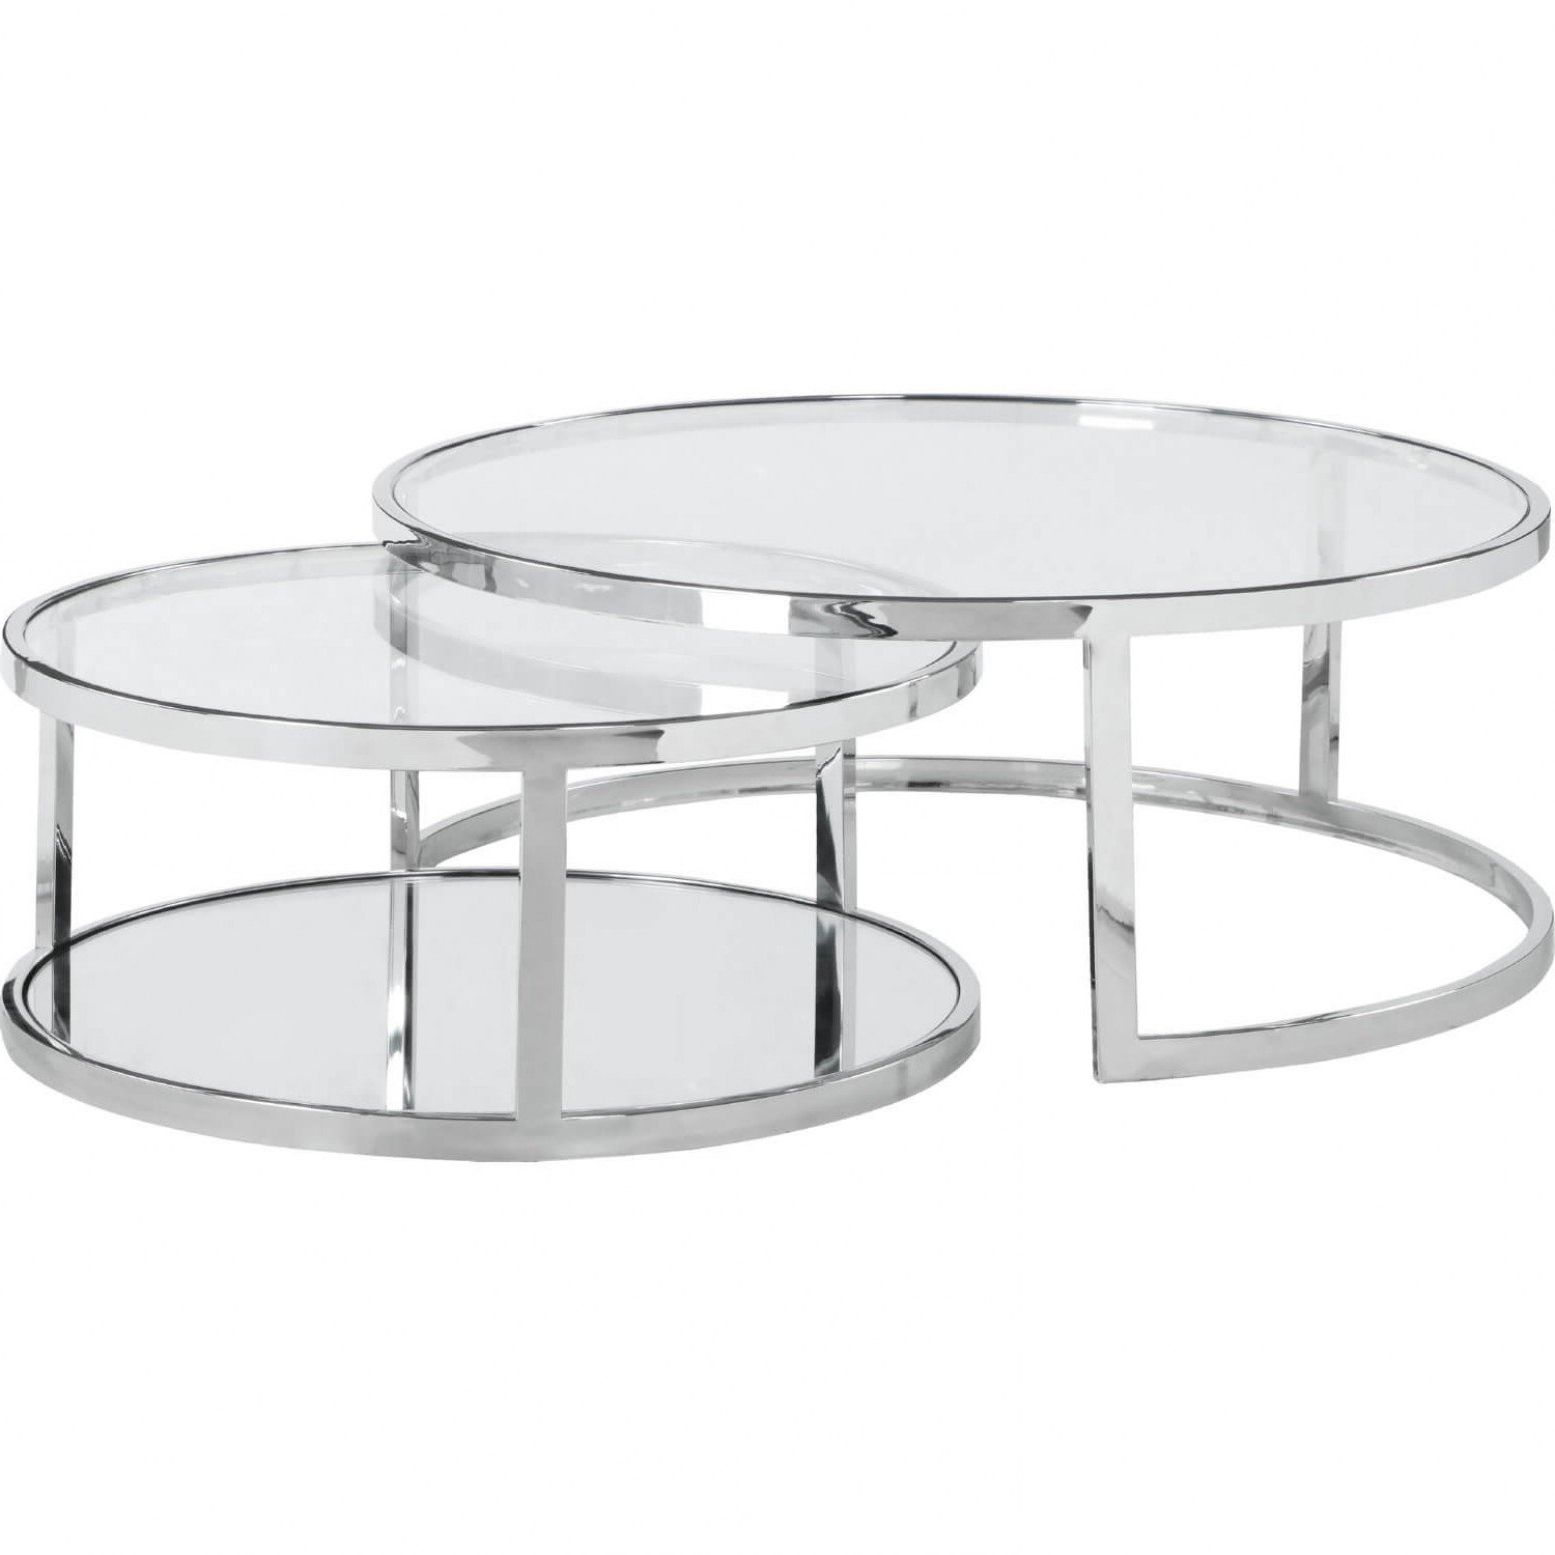 5509 35 Round Nesting Cocktail Table, Clear/polished Intended For Favorite Polished Chrome Round Cocktail Tables (View 9 of 20)